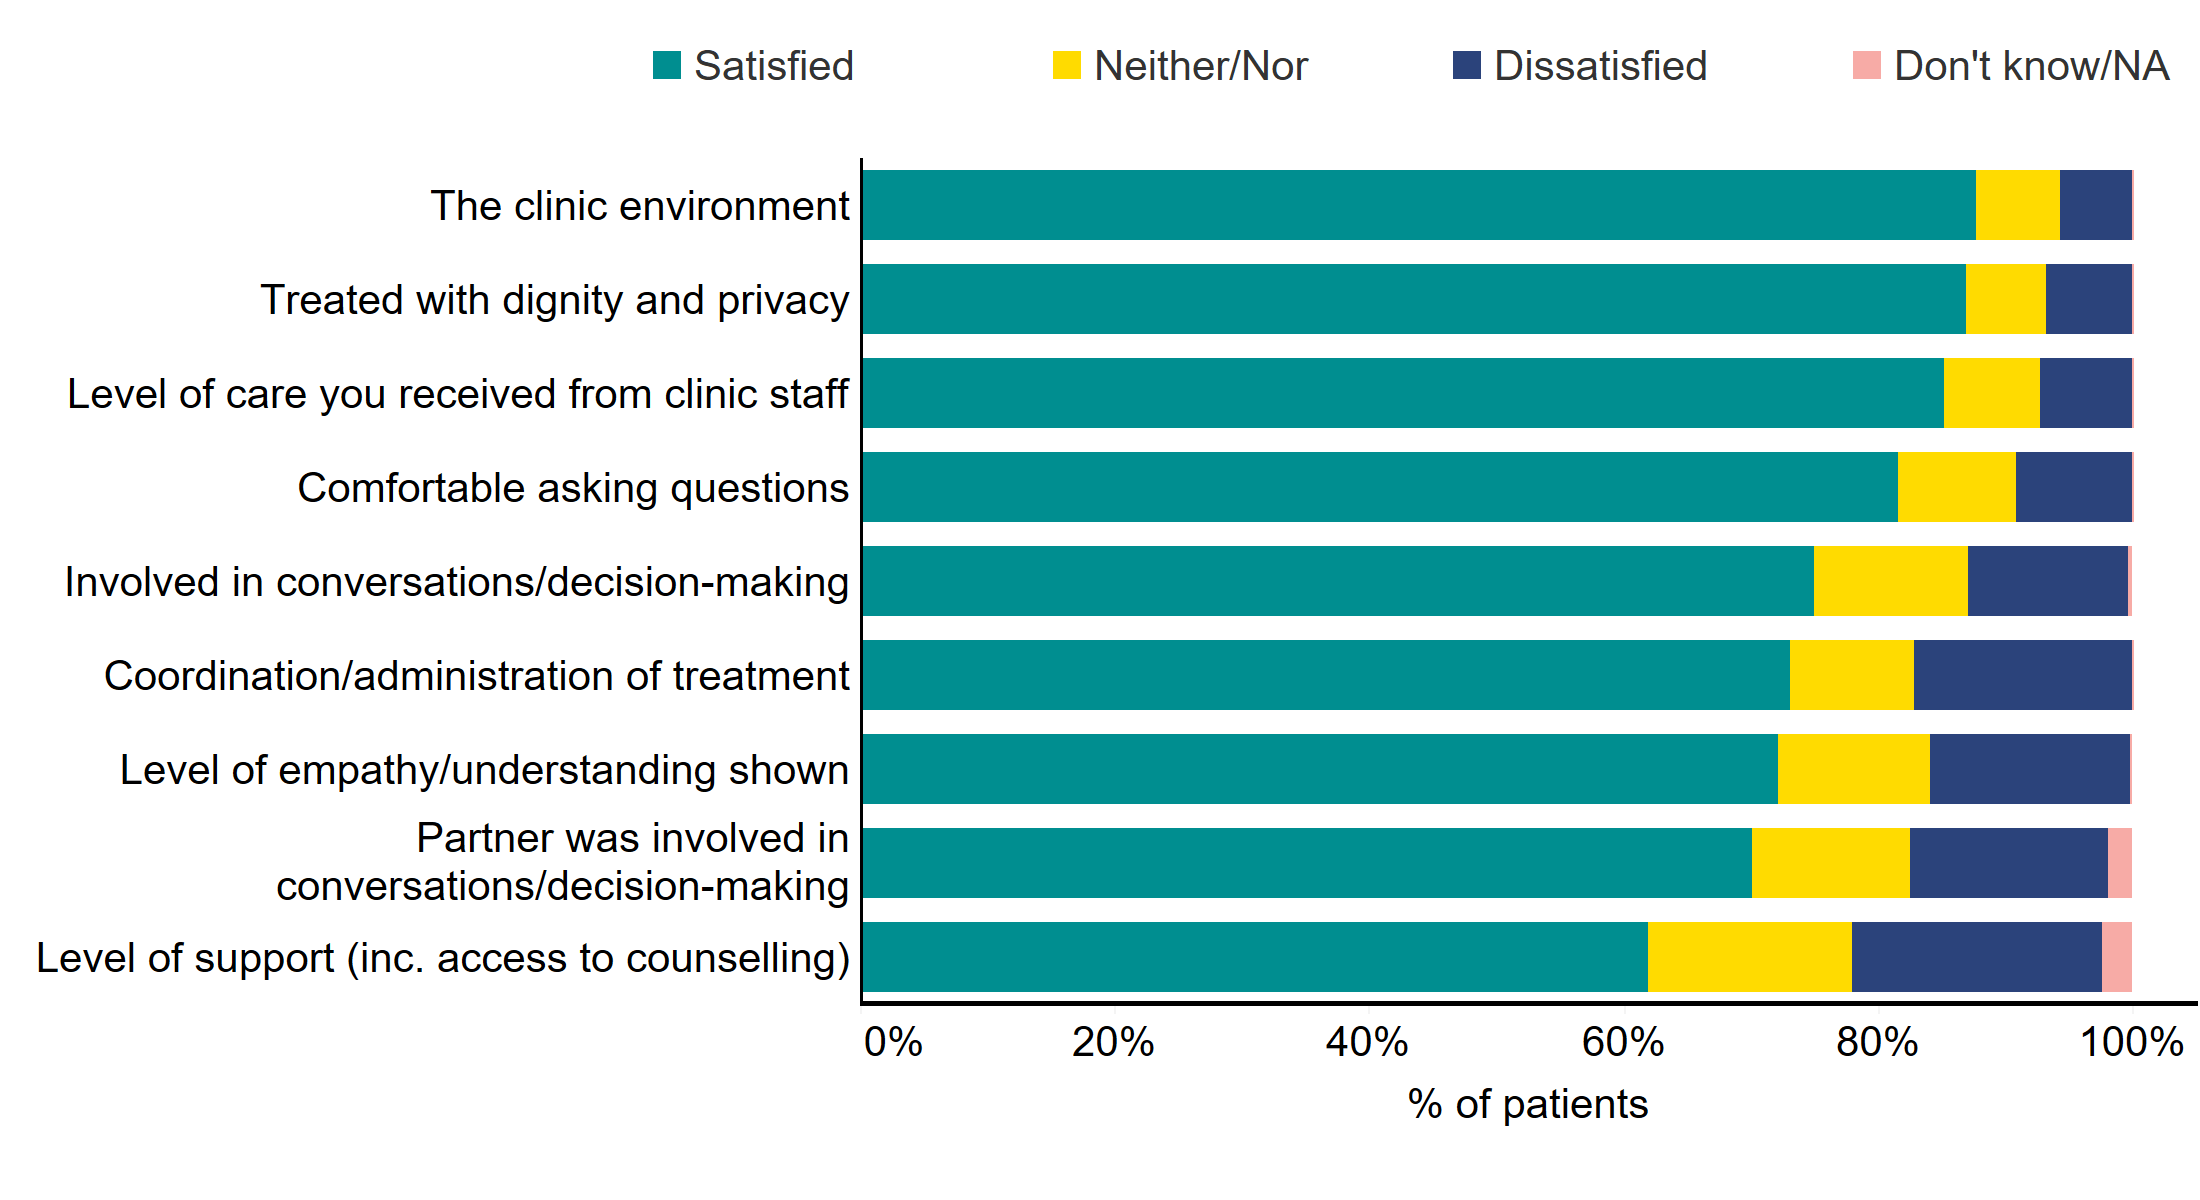 Figure 2: Satisfaction with various aspects of treatment. Satisfaction with various aspects of treatment, 2021. This stacked bar chart shows a breakdown of patient satisfaction with aspects of treatment provided by the fertility clinic. Patients were most likely to be satisfied with the clinic environment and being treated with dignity and privacy, and least likely to be satisfied with the level of support they received (e.g. access to counselling). An accessible form of the underlying data for this figure can be downloaded at the start of the report in .xls format.